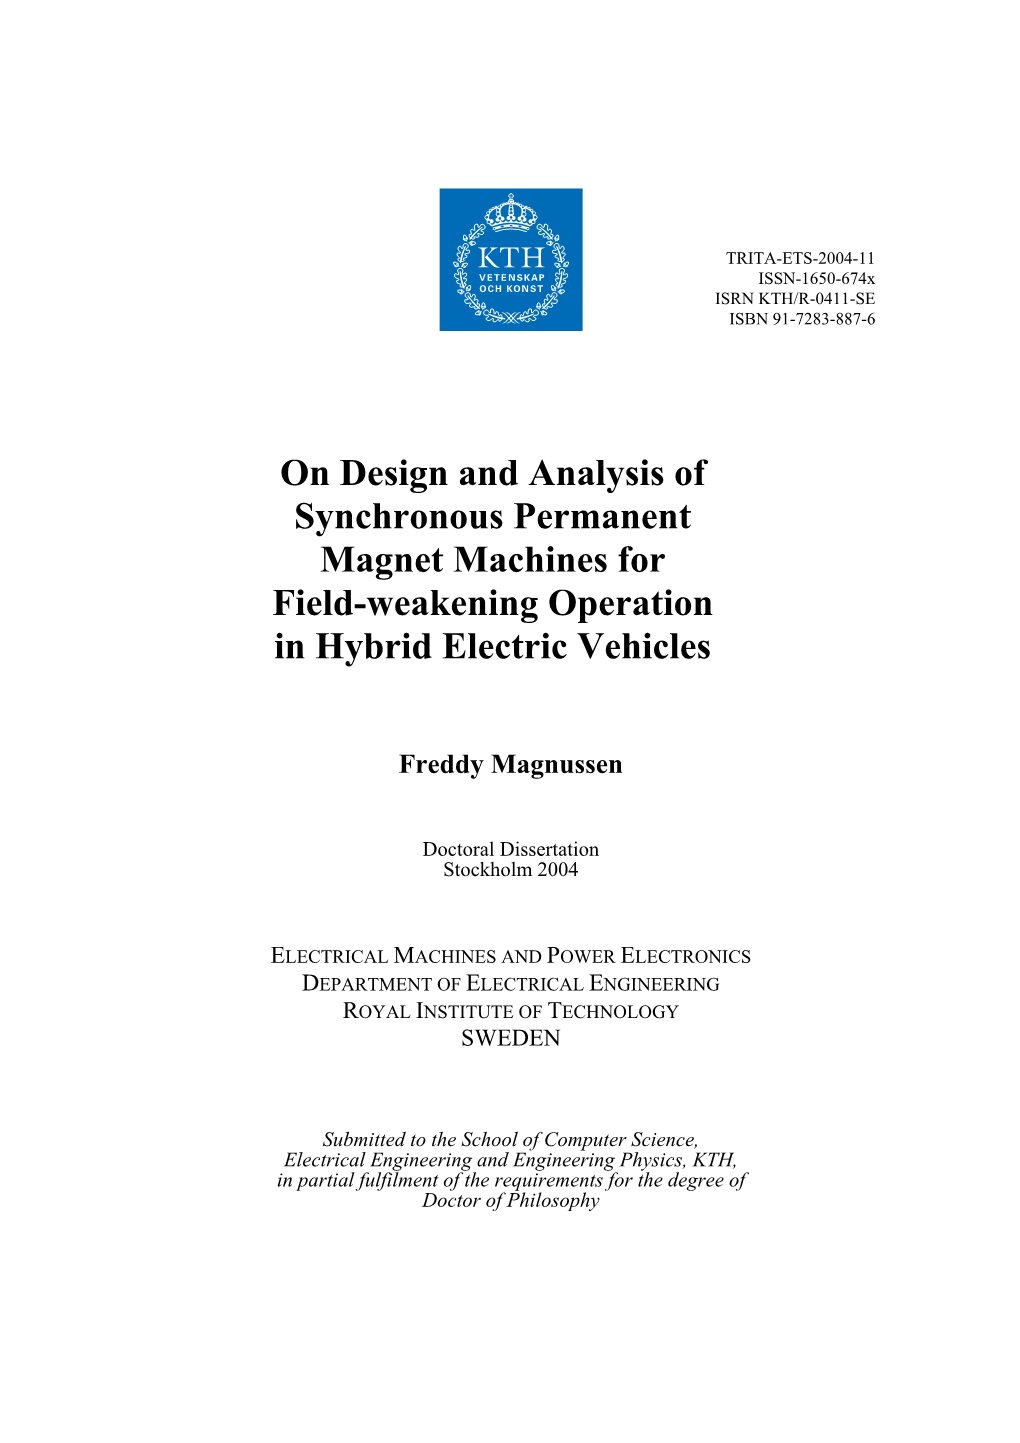 On Design and Analysis of Synchronous Permanent Magnet Machines for Field-Weakening Operation in Hybrid Electric Vehicles